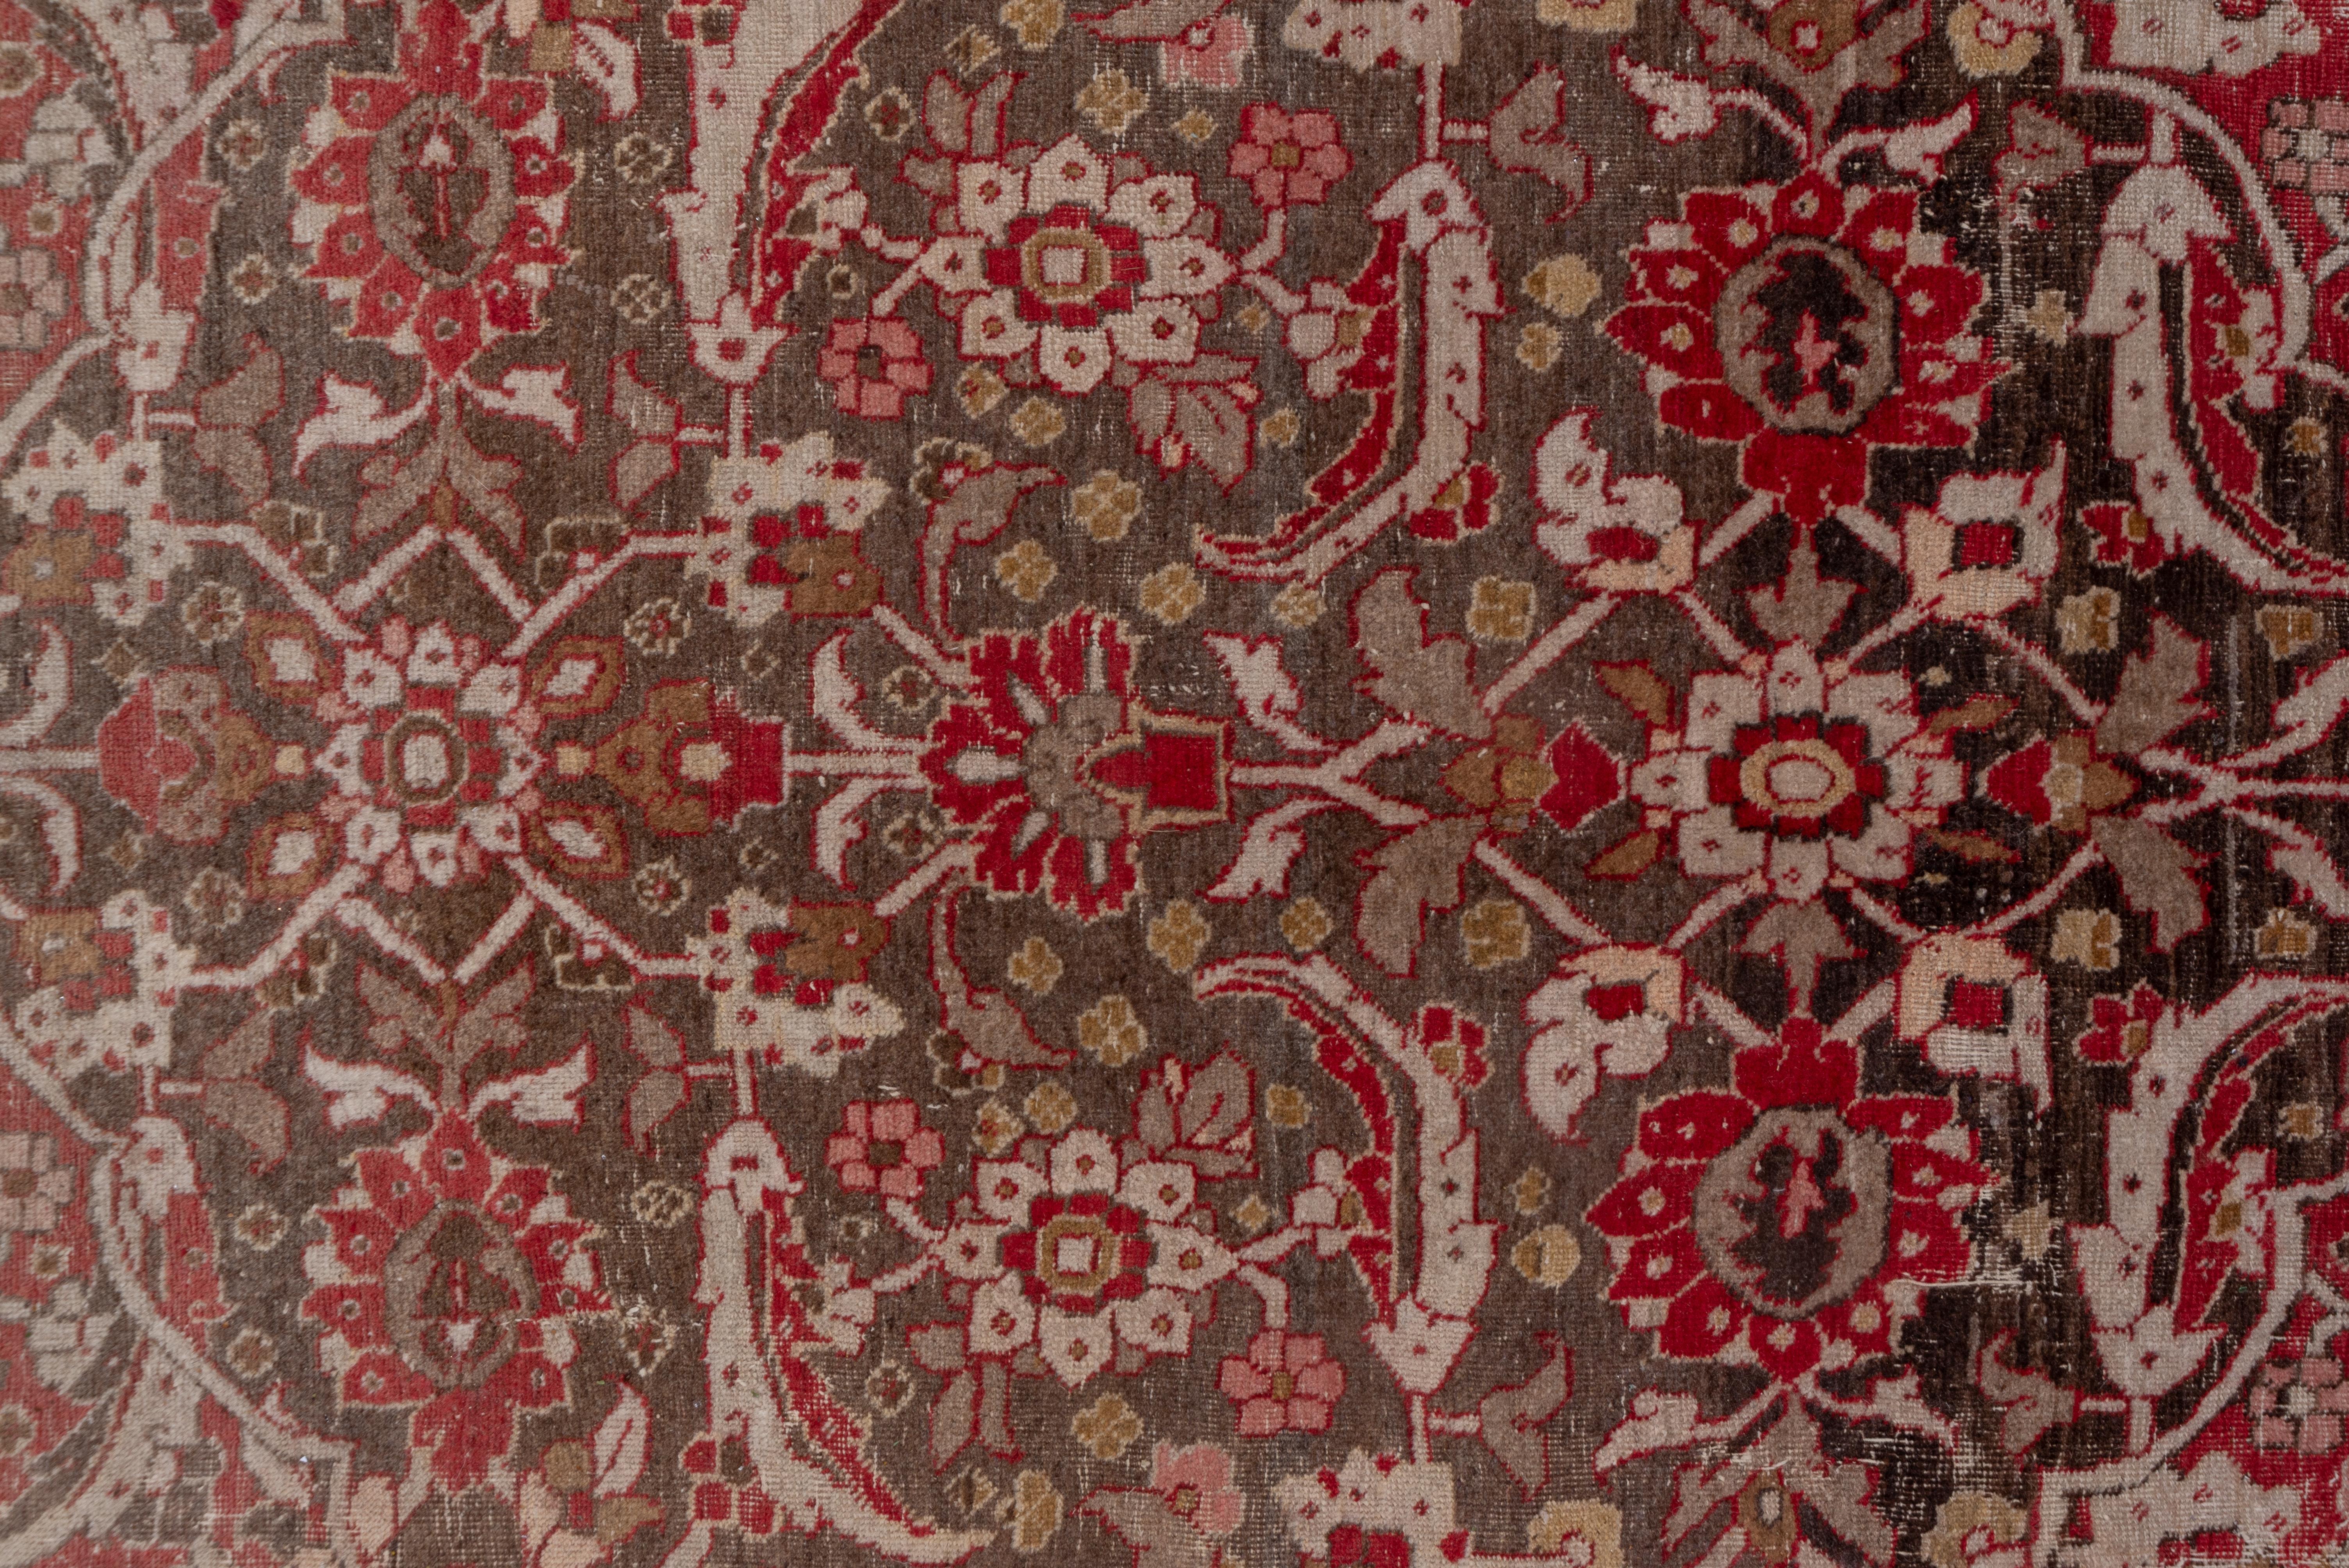 This interwar NW Persian well-woven carpet still has presence in the significantly abrashed field going from brick to light brown with a strong arabesque and flowering palmette allover pattern contained by scalloped rosette and 'fish' leaf corners.